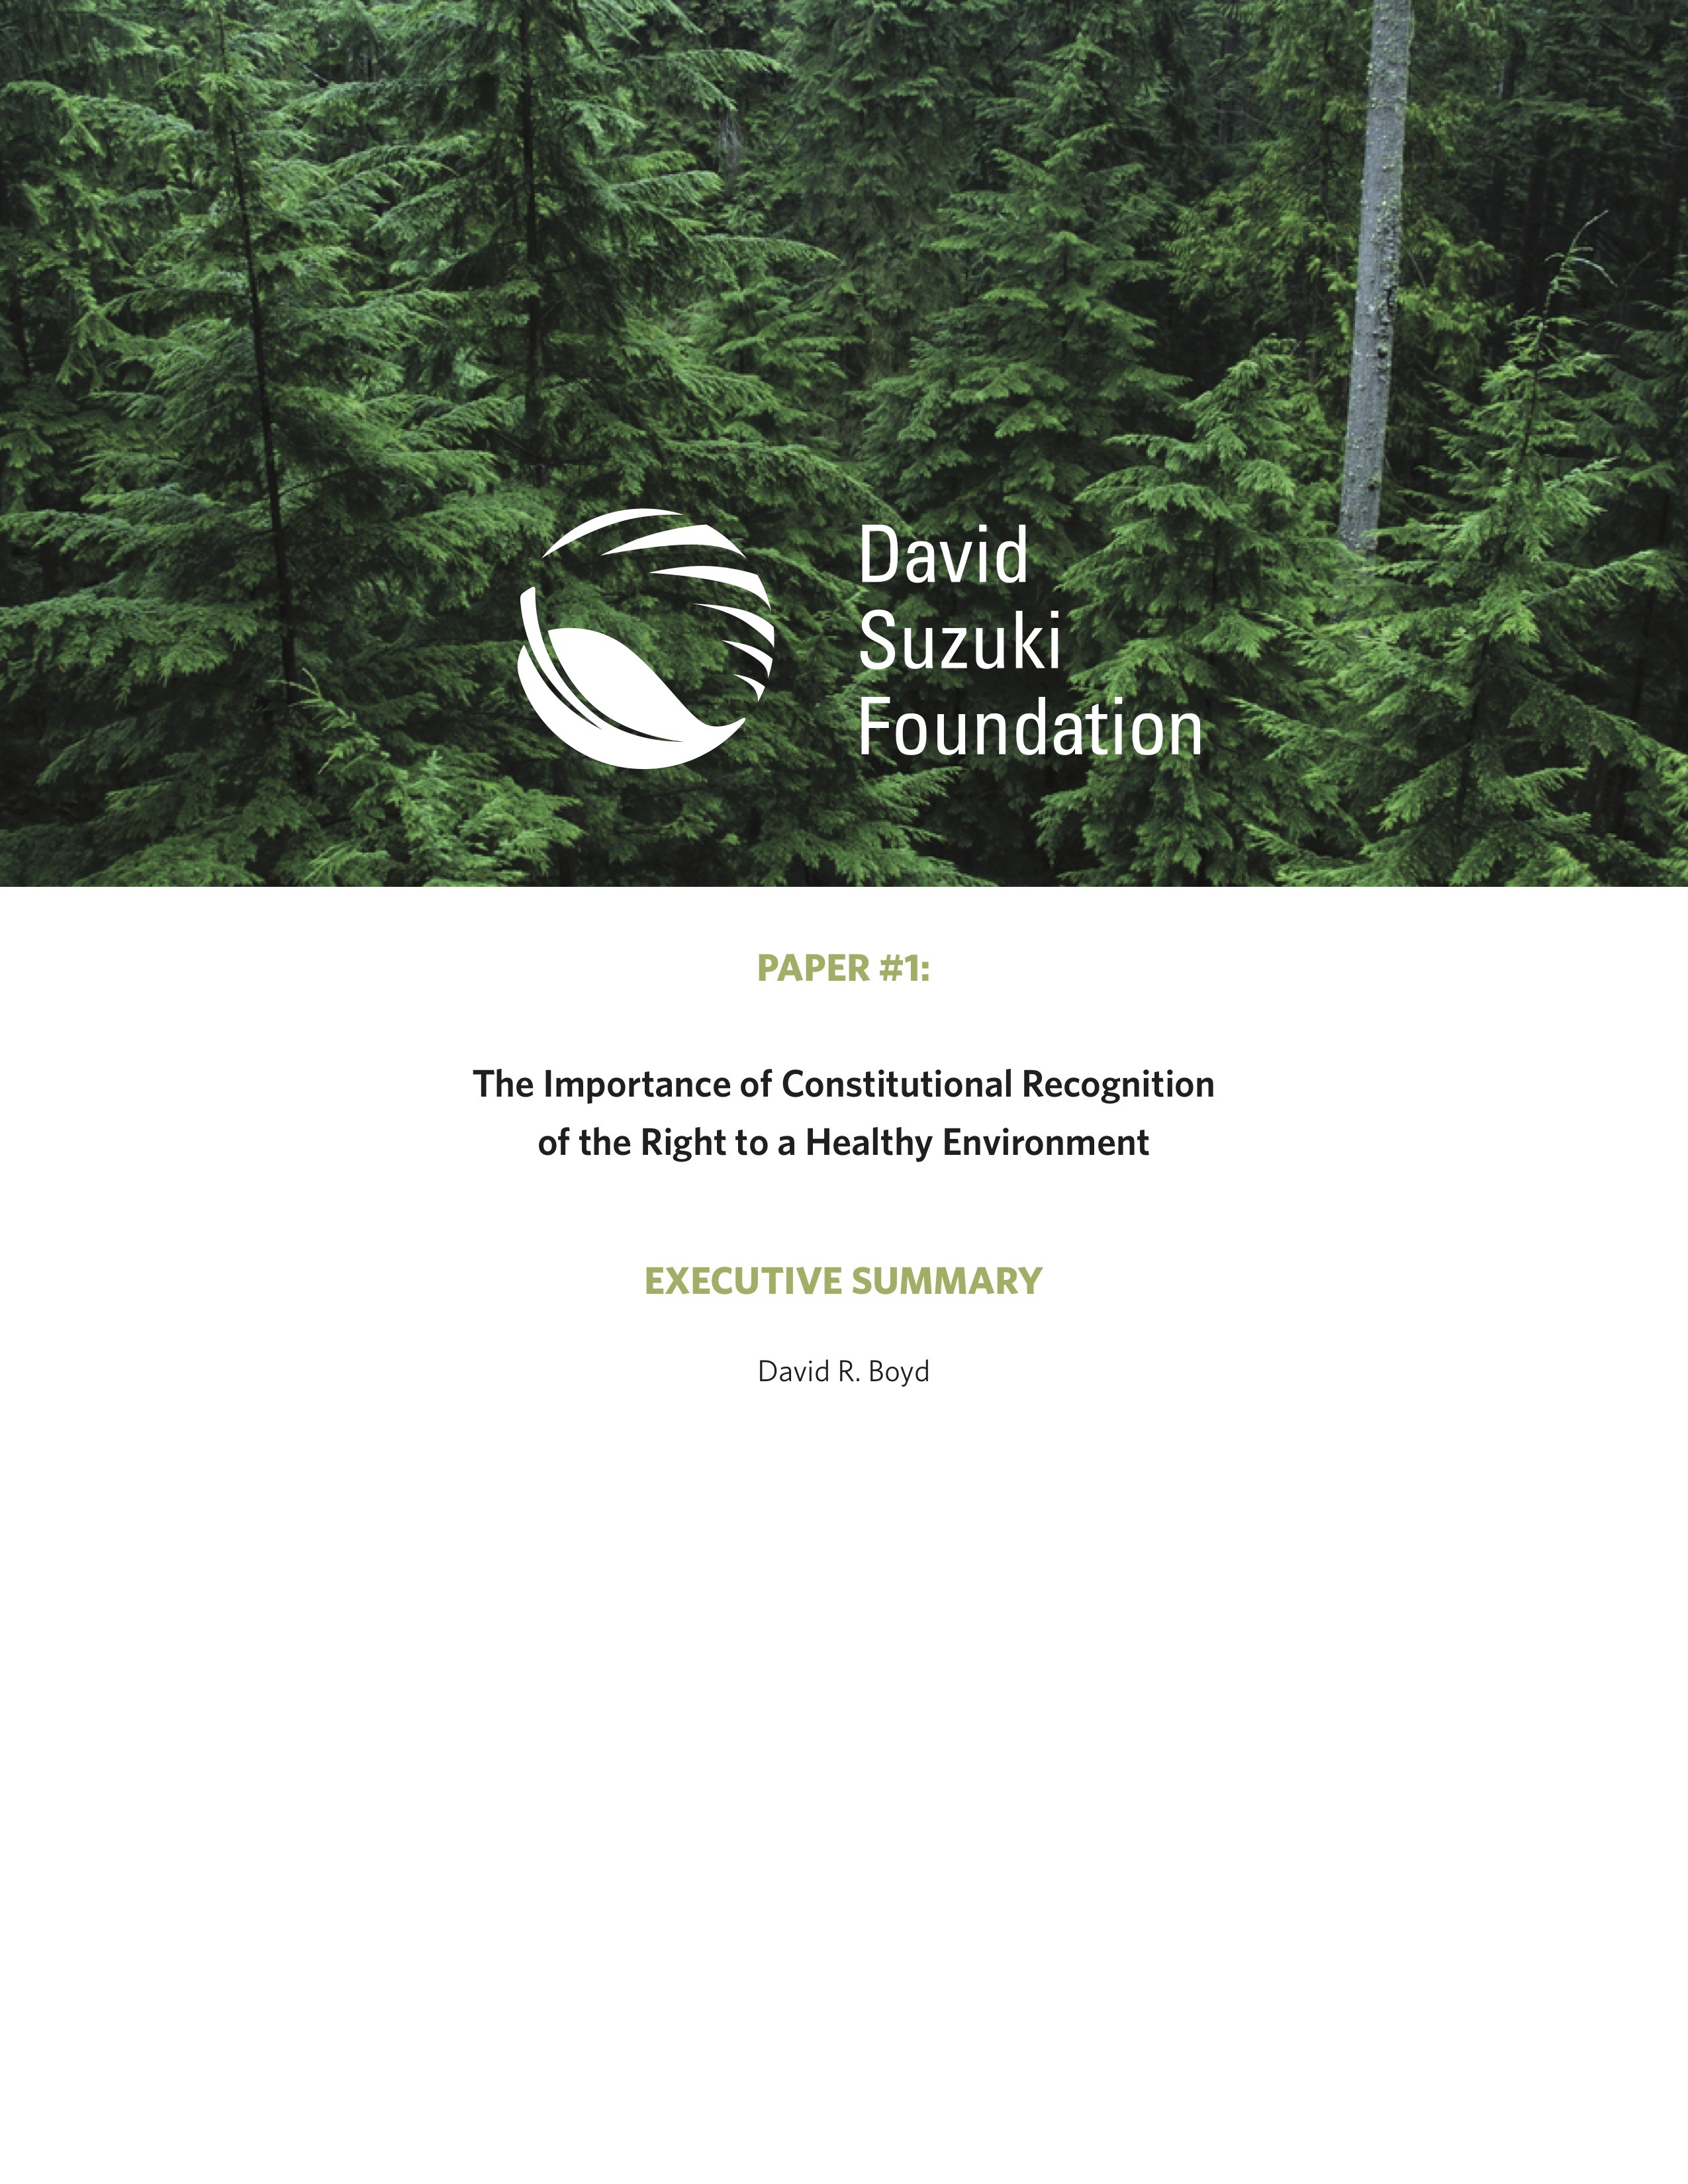 EXECUTIVE SUMMARY — The Importance of Constitutional Recognition of the Right to a Healthy Environment